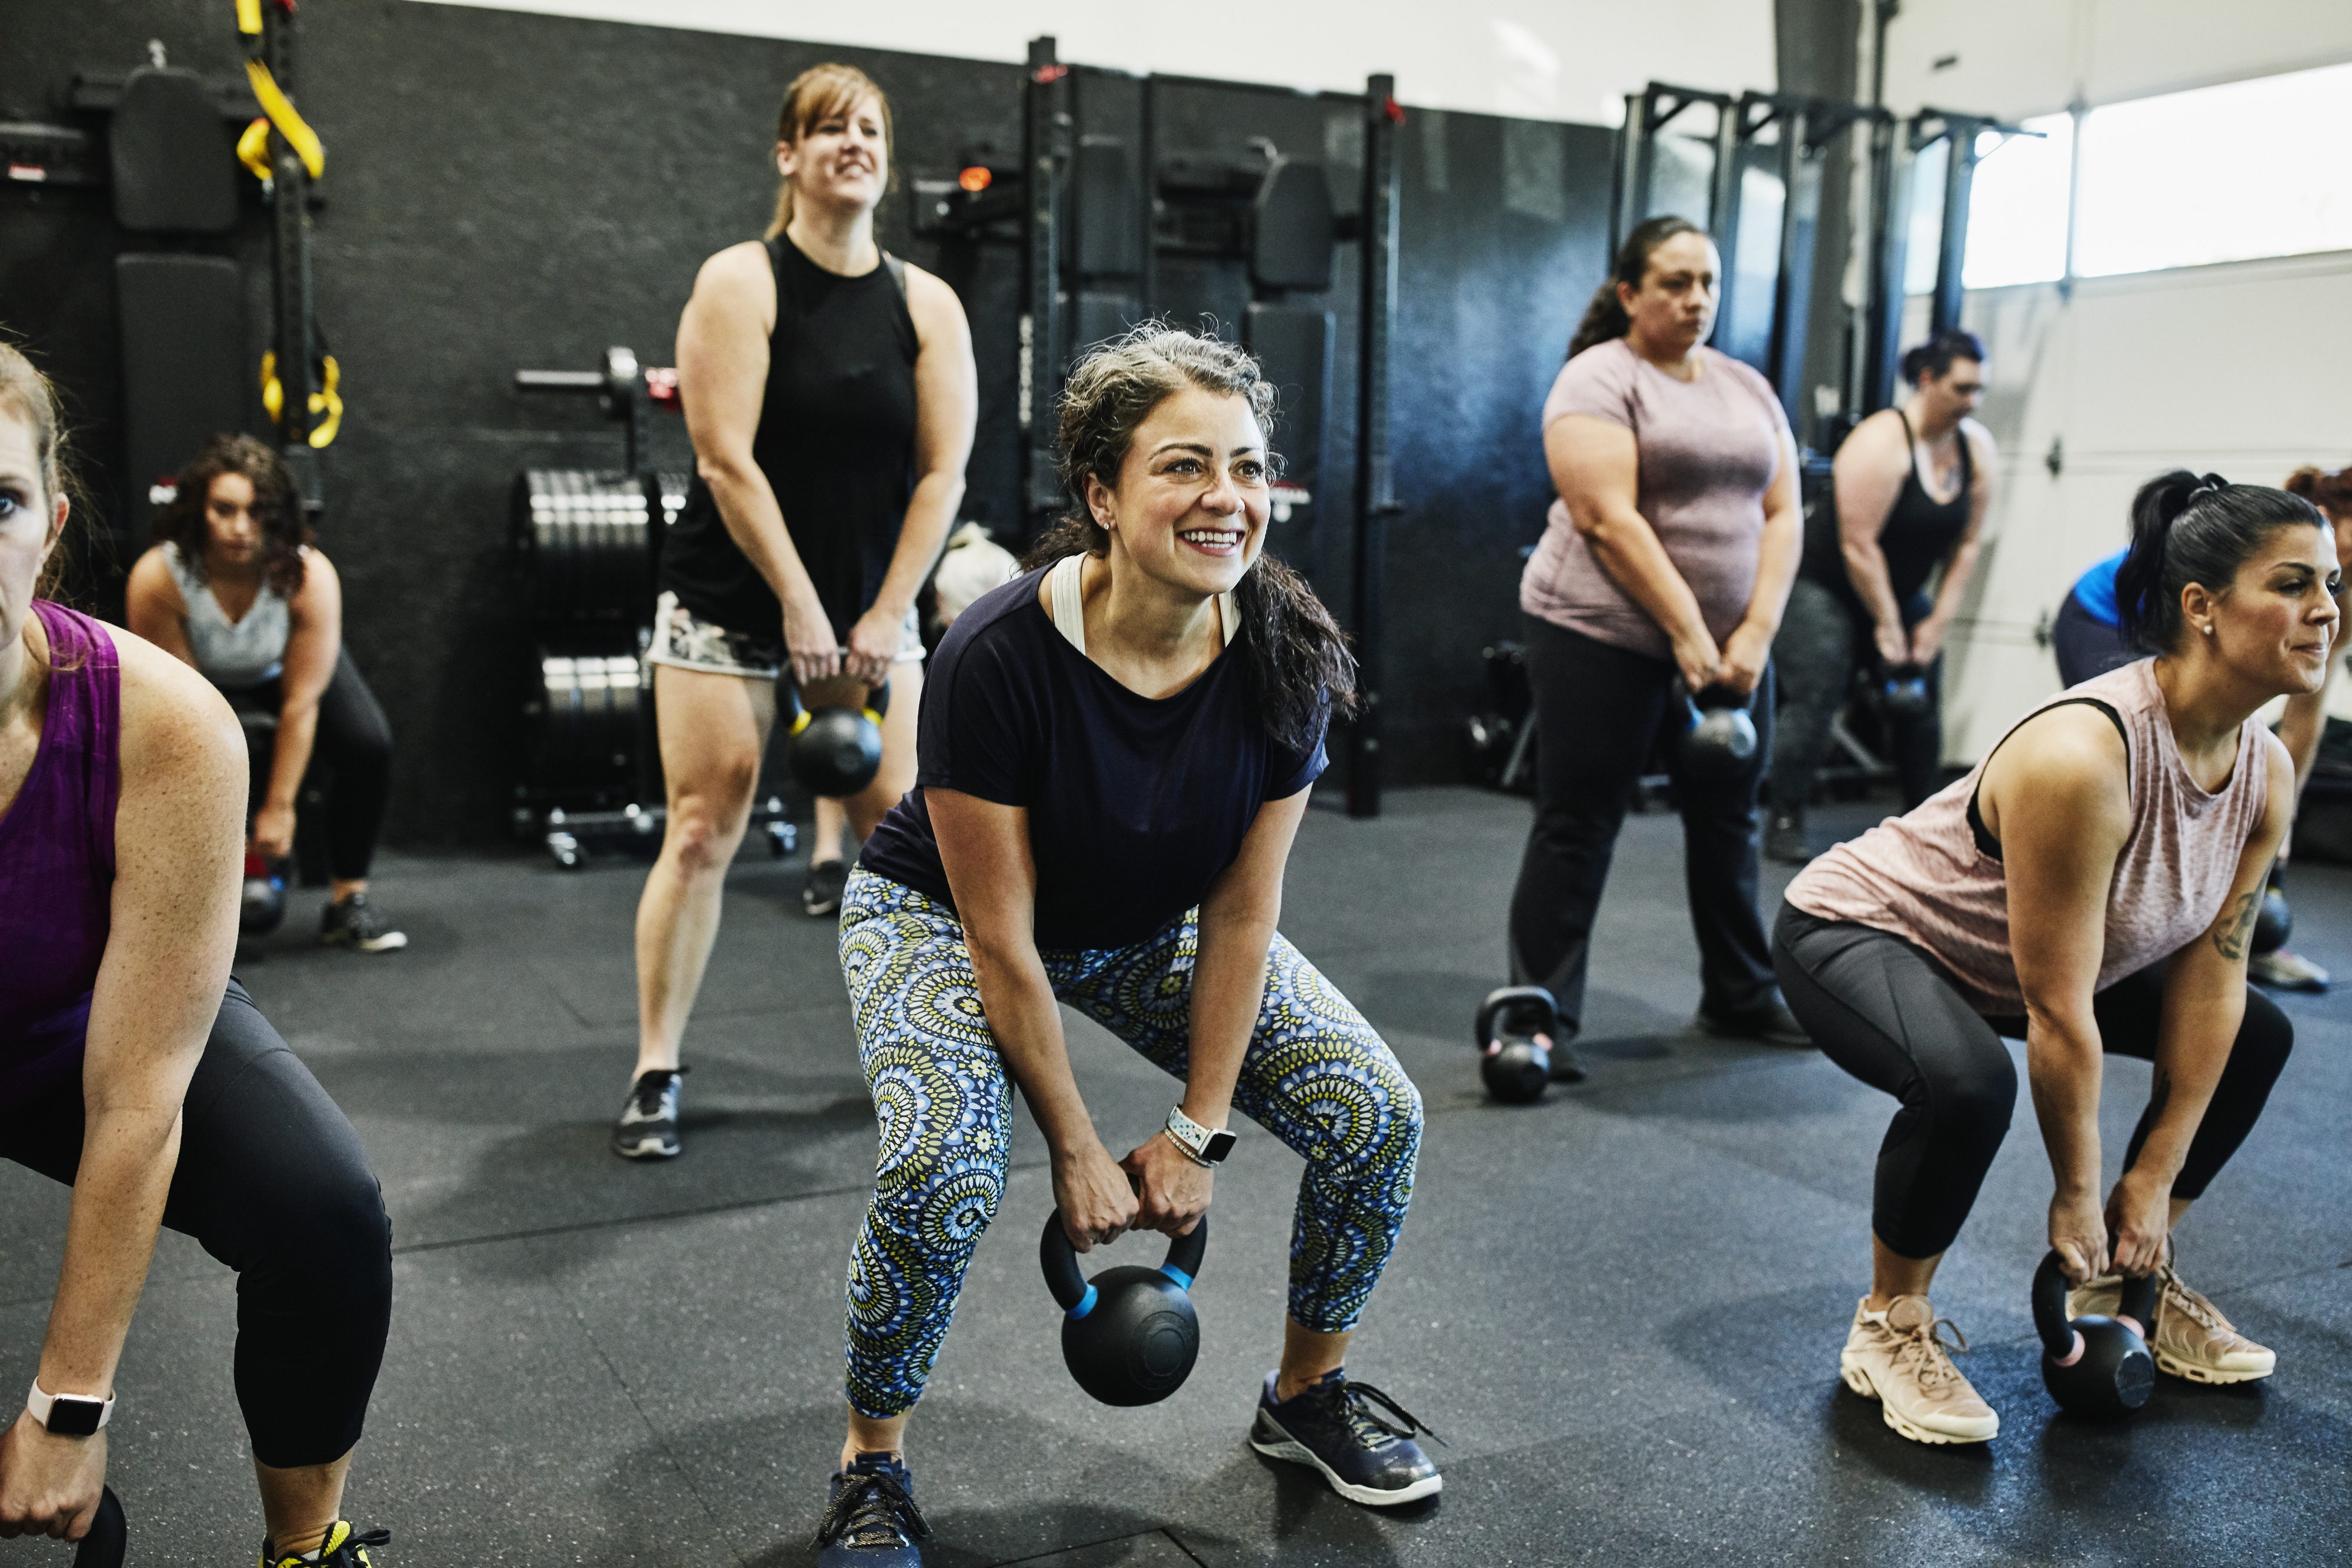 Group of people in a fitness class doing squats with kettlebells